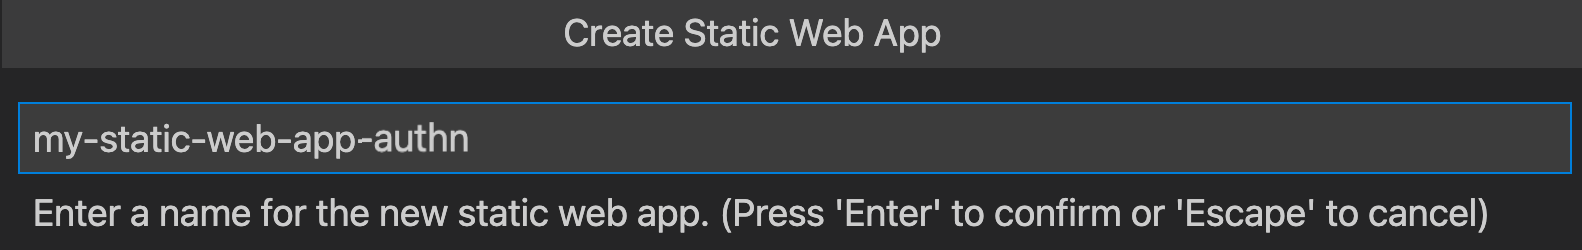 Screenshot showing how to create Static Web Apps.